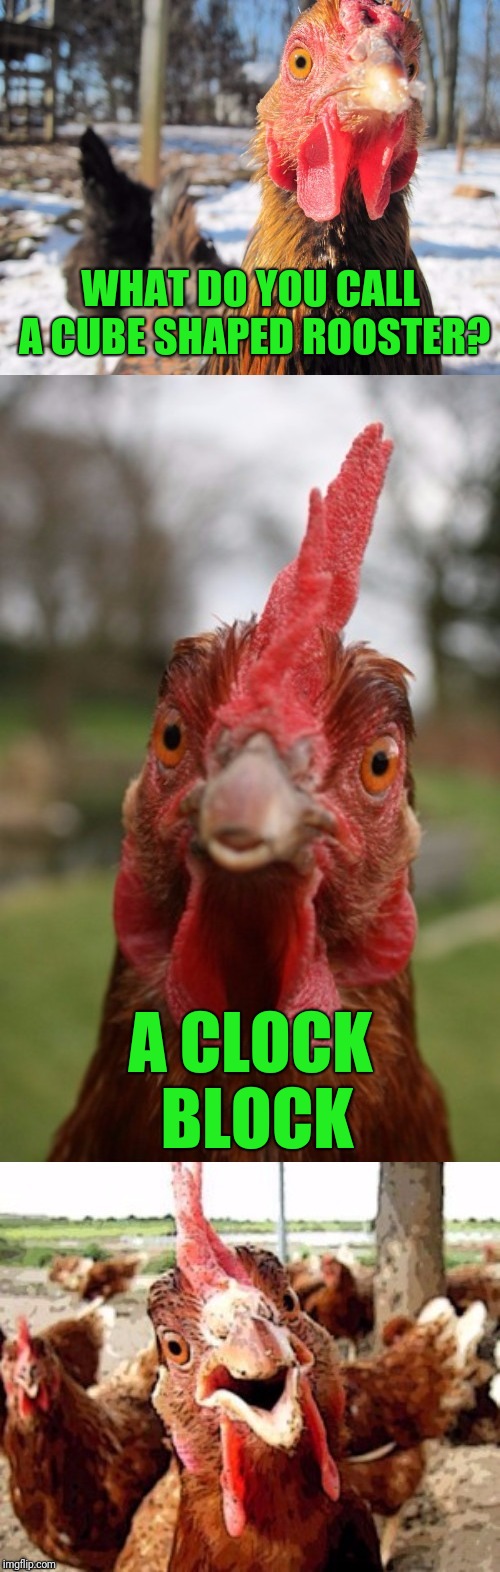 bad pun chicken | WHAT DO YOU CALL A CUBE SHAPED ROOSTER? A CLOCK BLOCK | image tagged in bad pun chicken | made w/ Imgflip meme maker